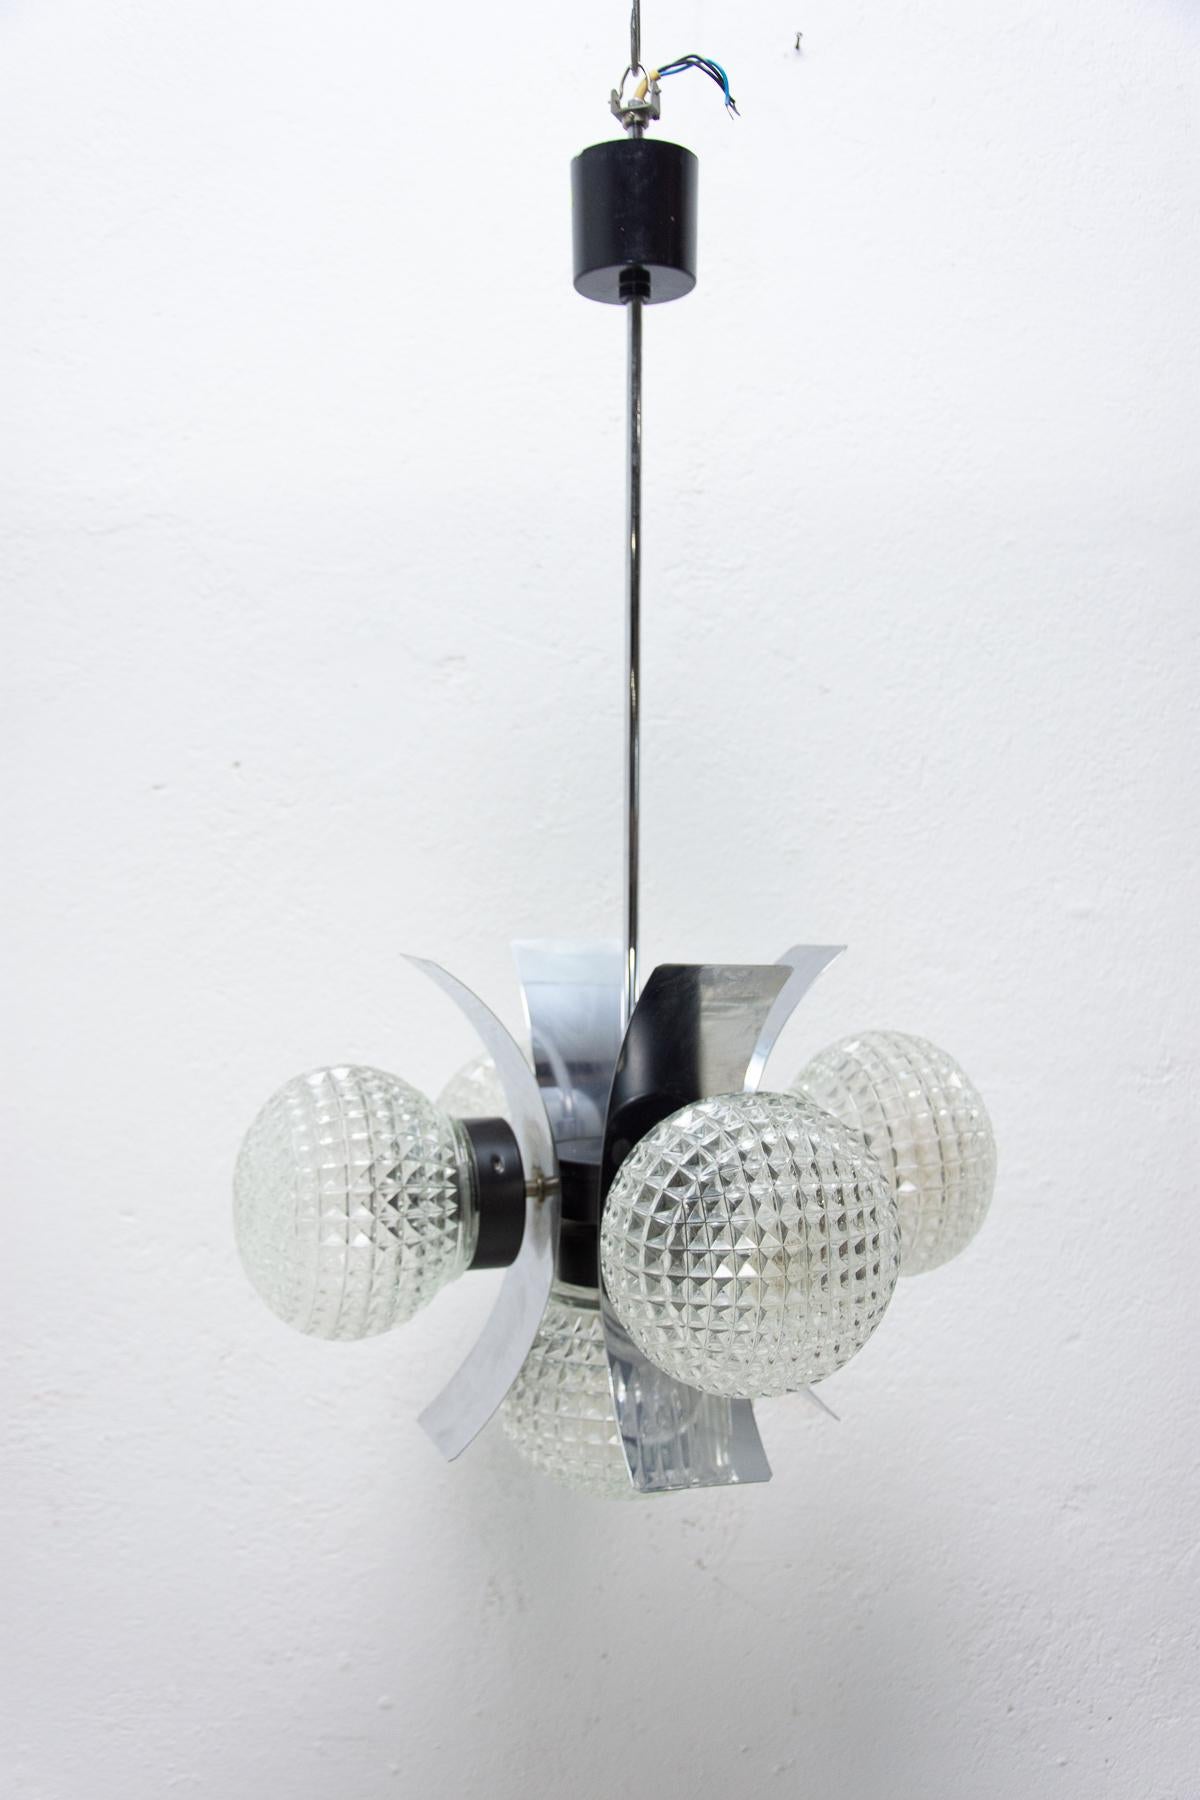 Eastern Bloc Brutalist Pendant Lamp from the 1970s, Czechoslovakia For Sale 1